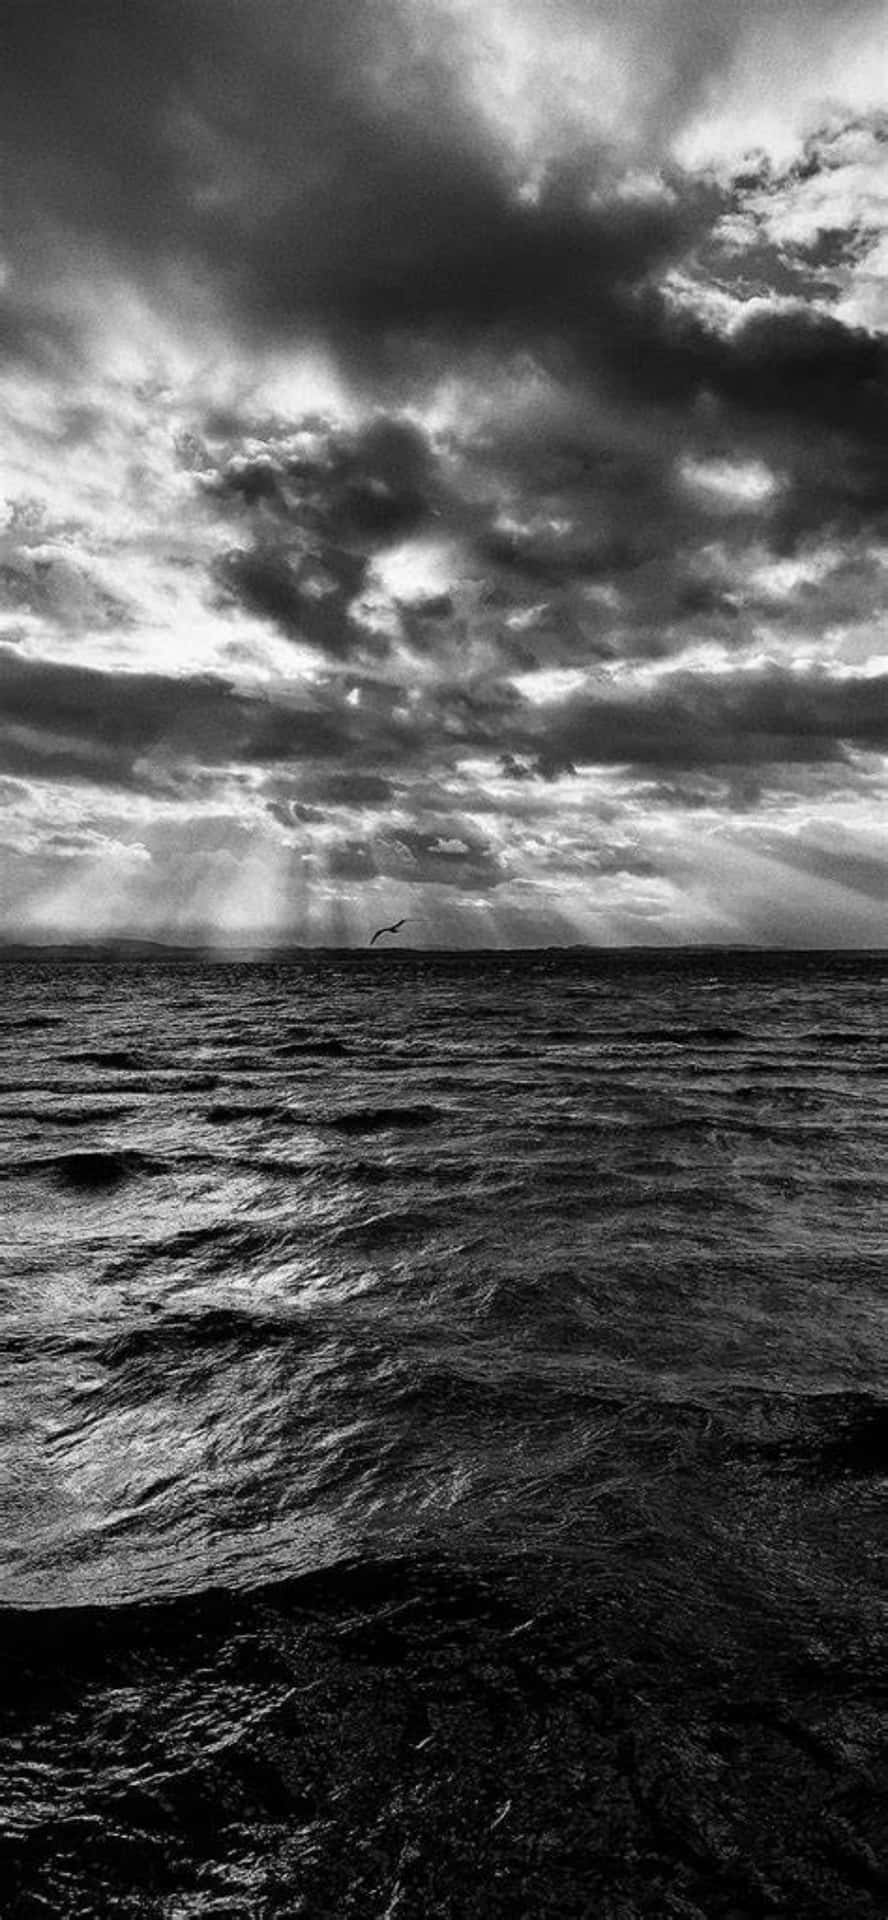 Black And White Photo Of A Cloudy Sky Over The Ocean